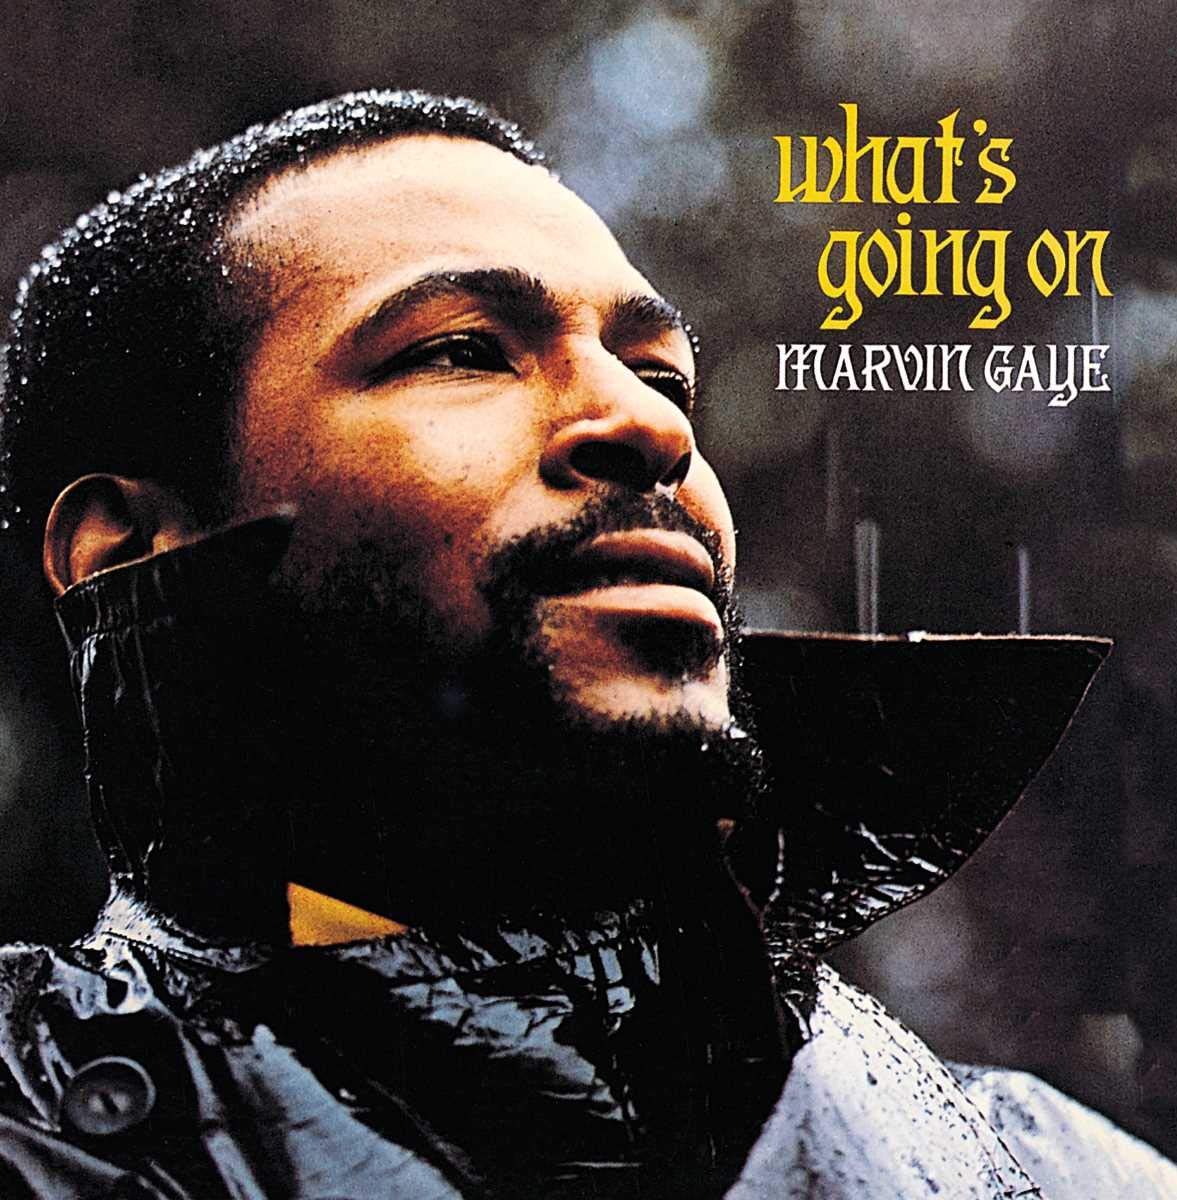 Marvin Gaye "What's Going On" LP